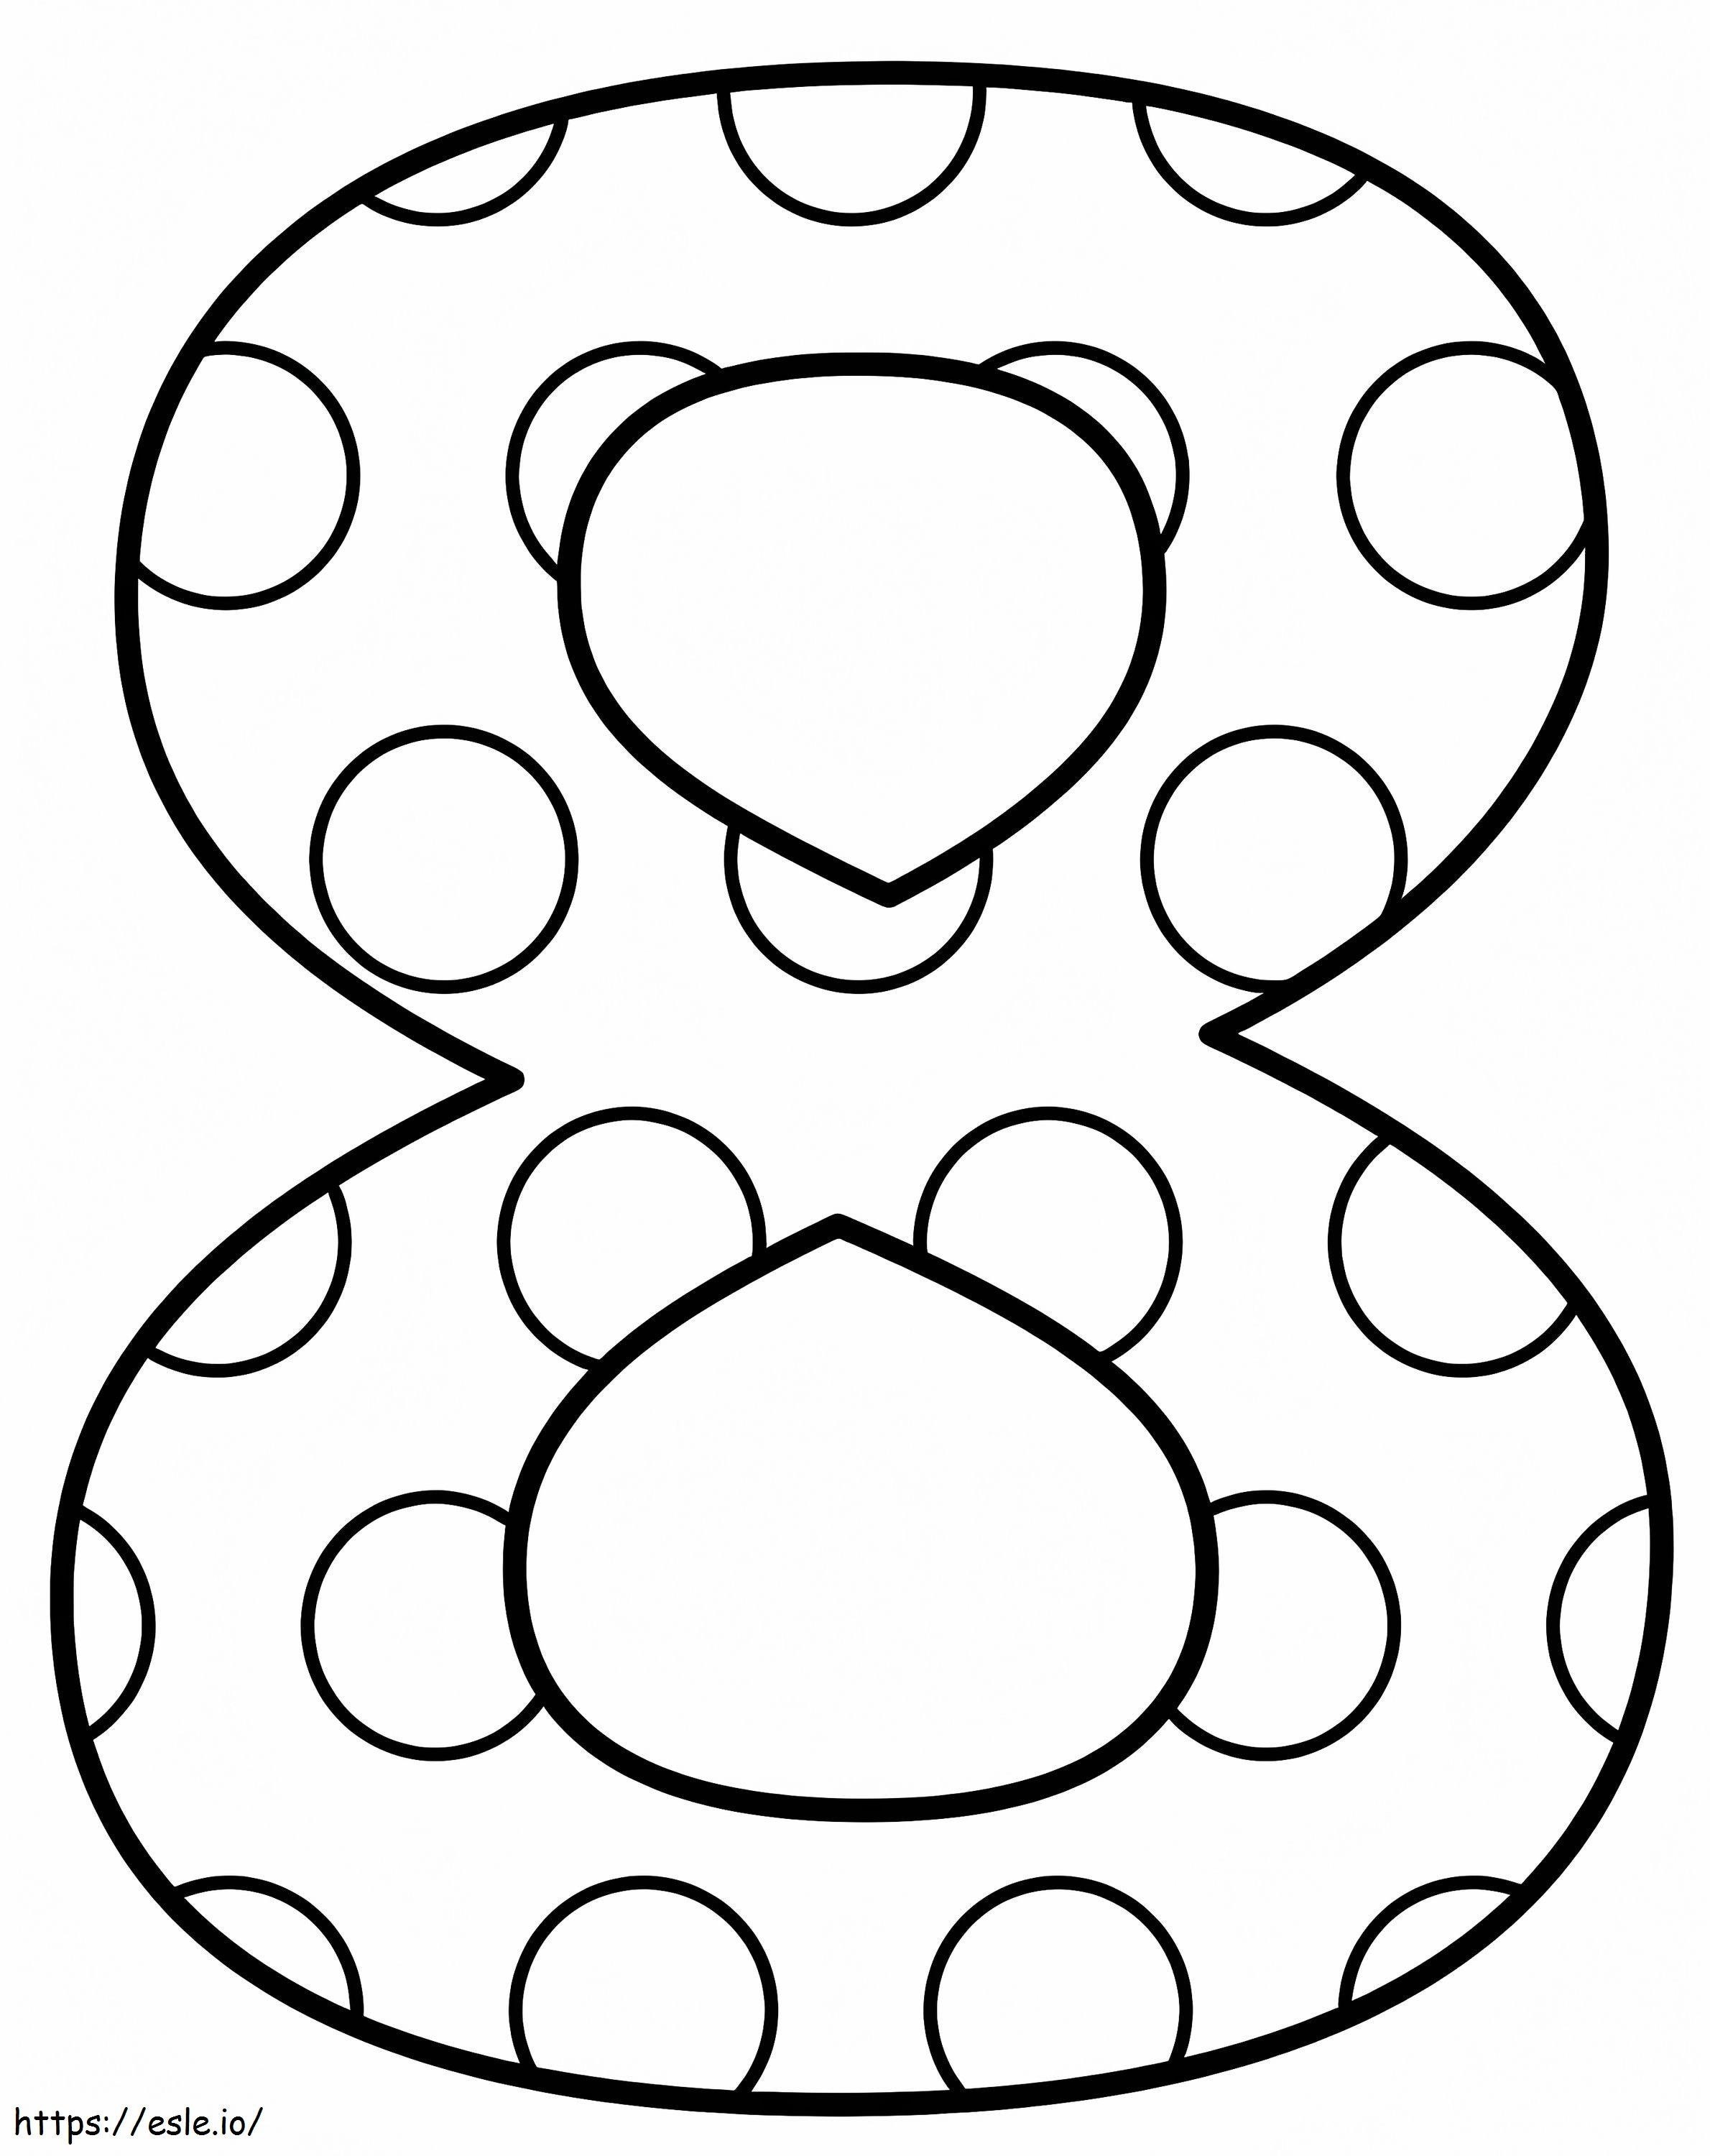 Printable Number 8 coloring page